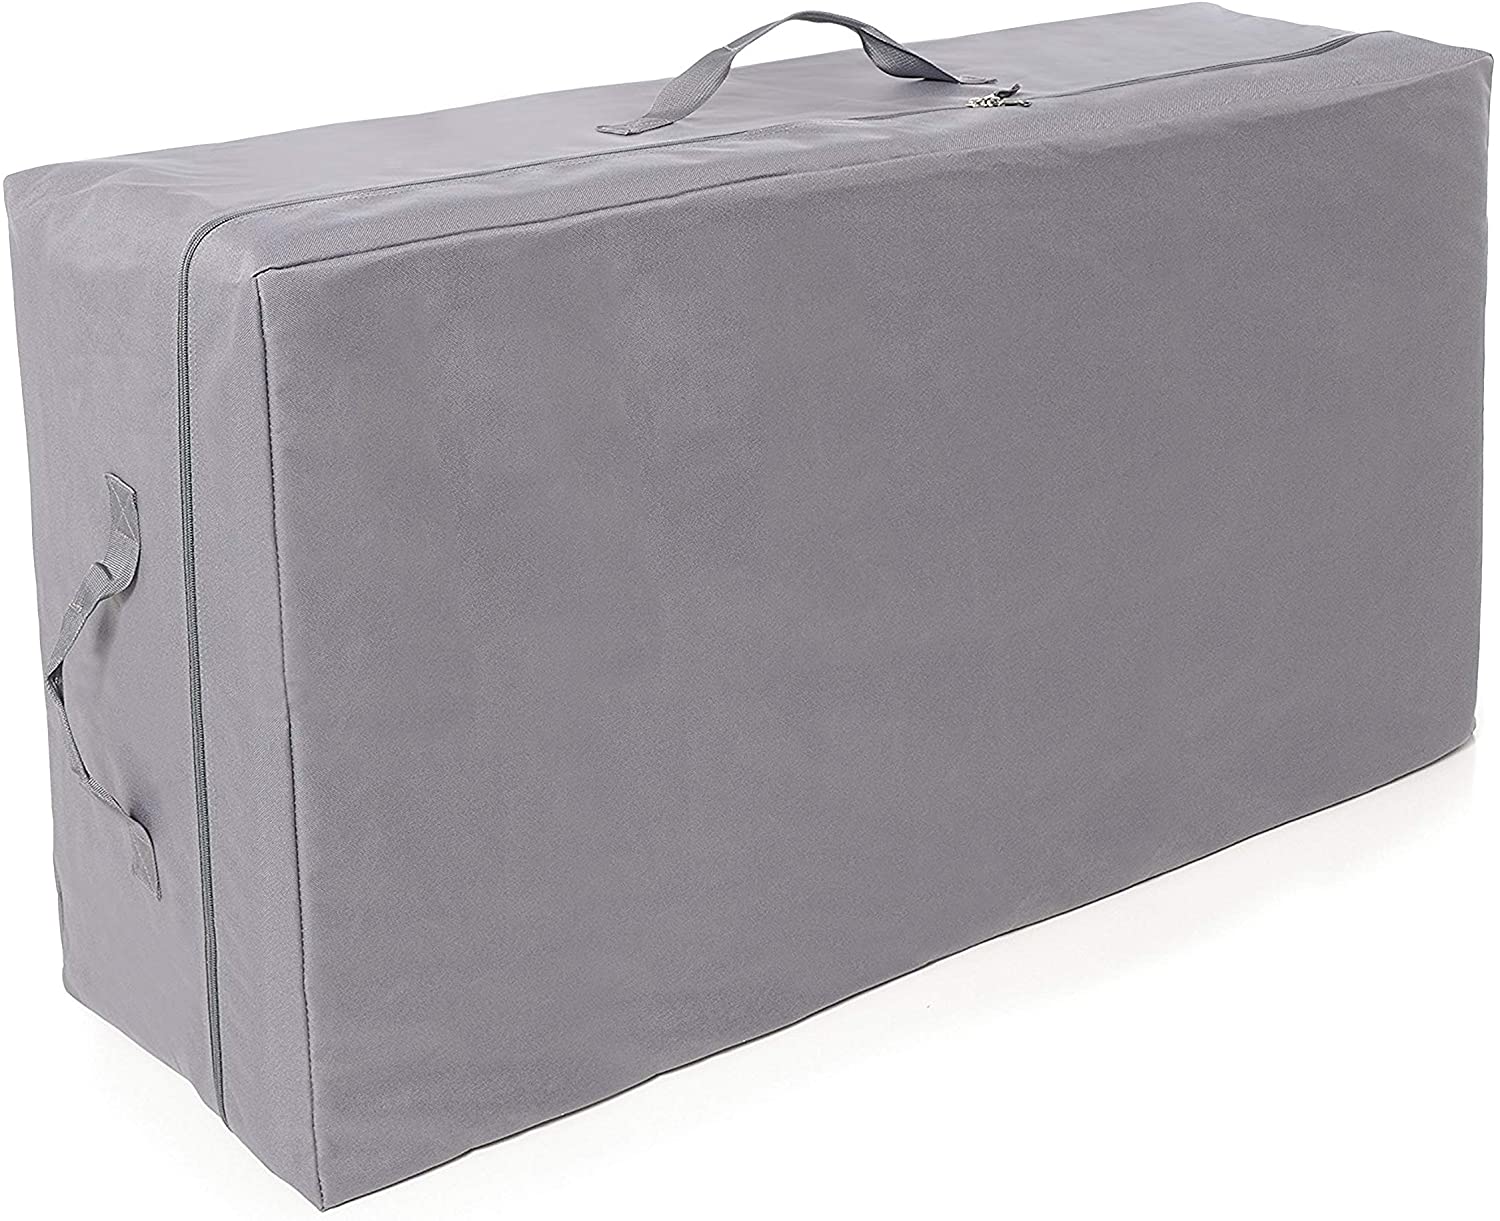 carry bag for mattress pad